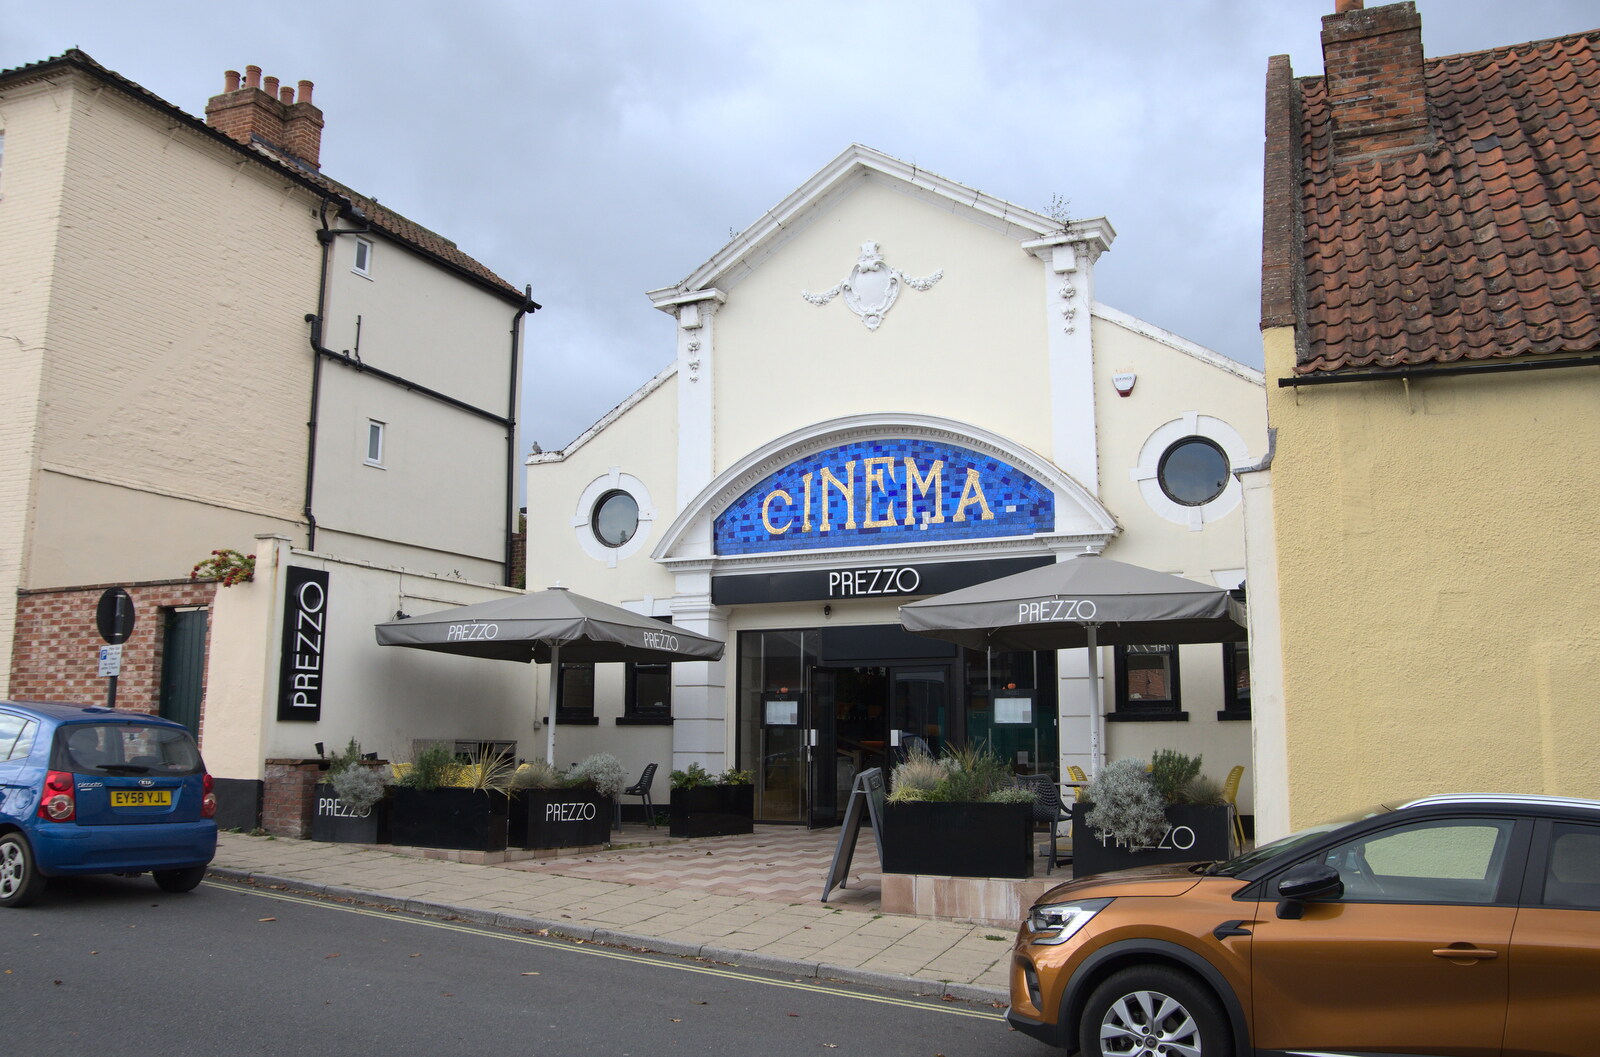 An Afternoon in Beccles, Suffolk - 26th October 2022: Prezzo is still going in the old Cinema